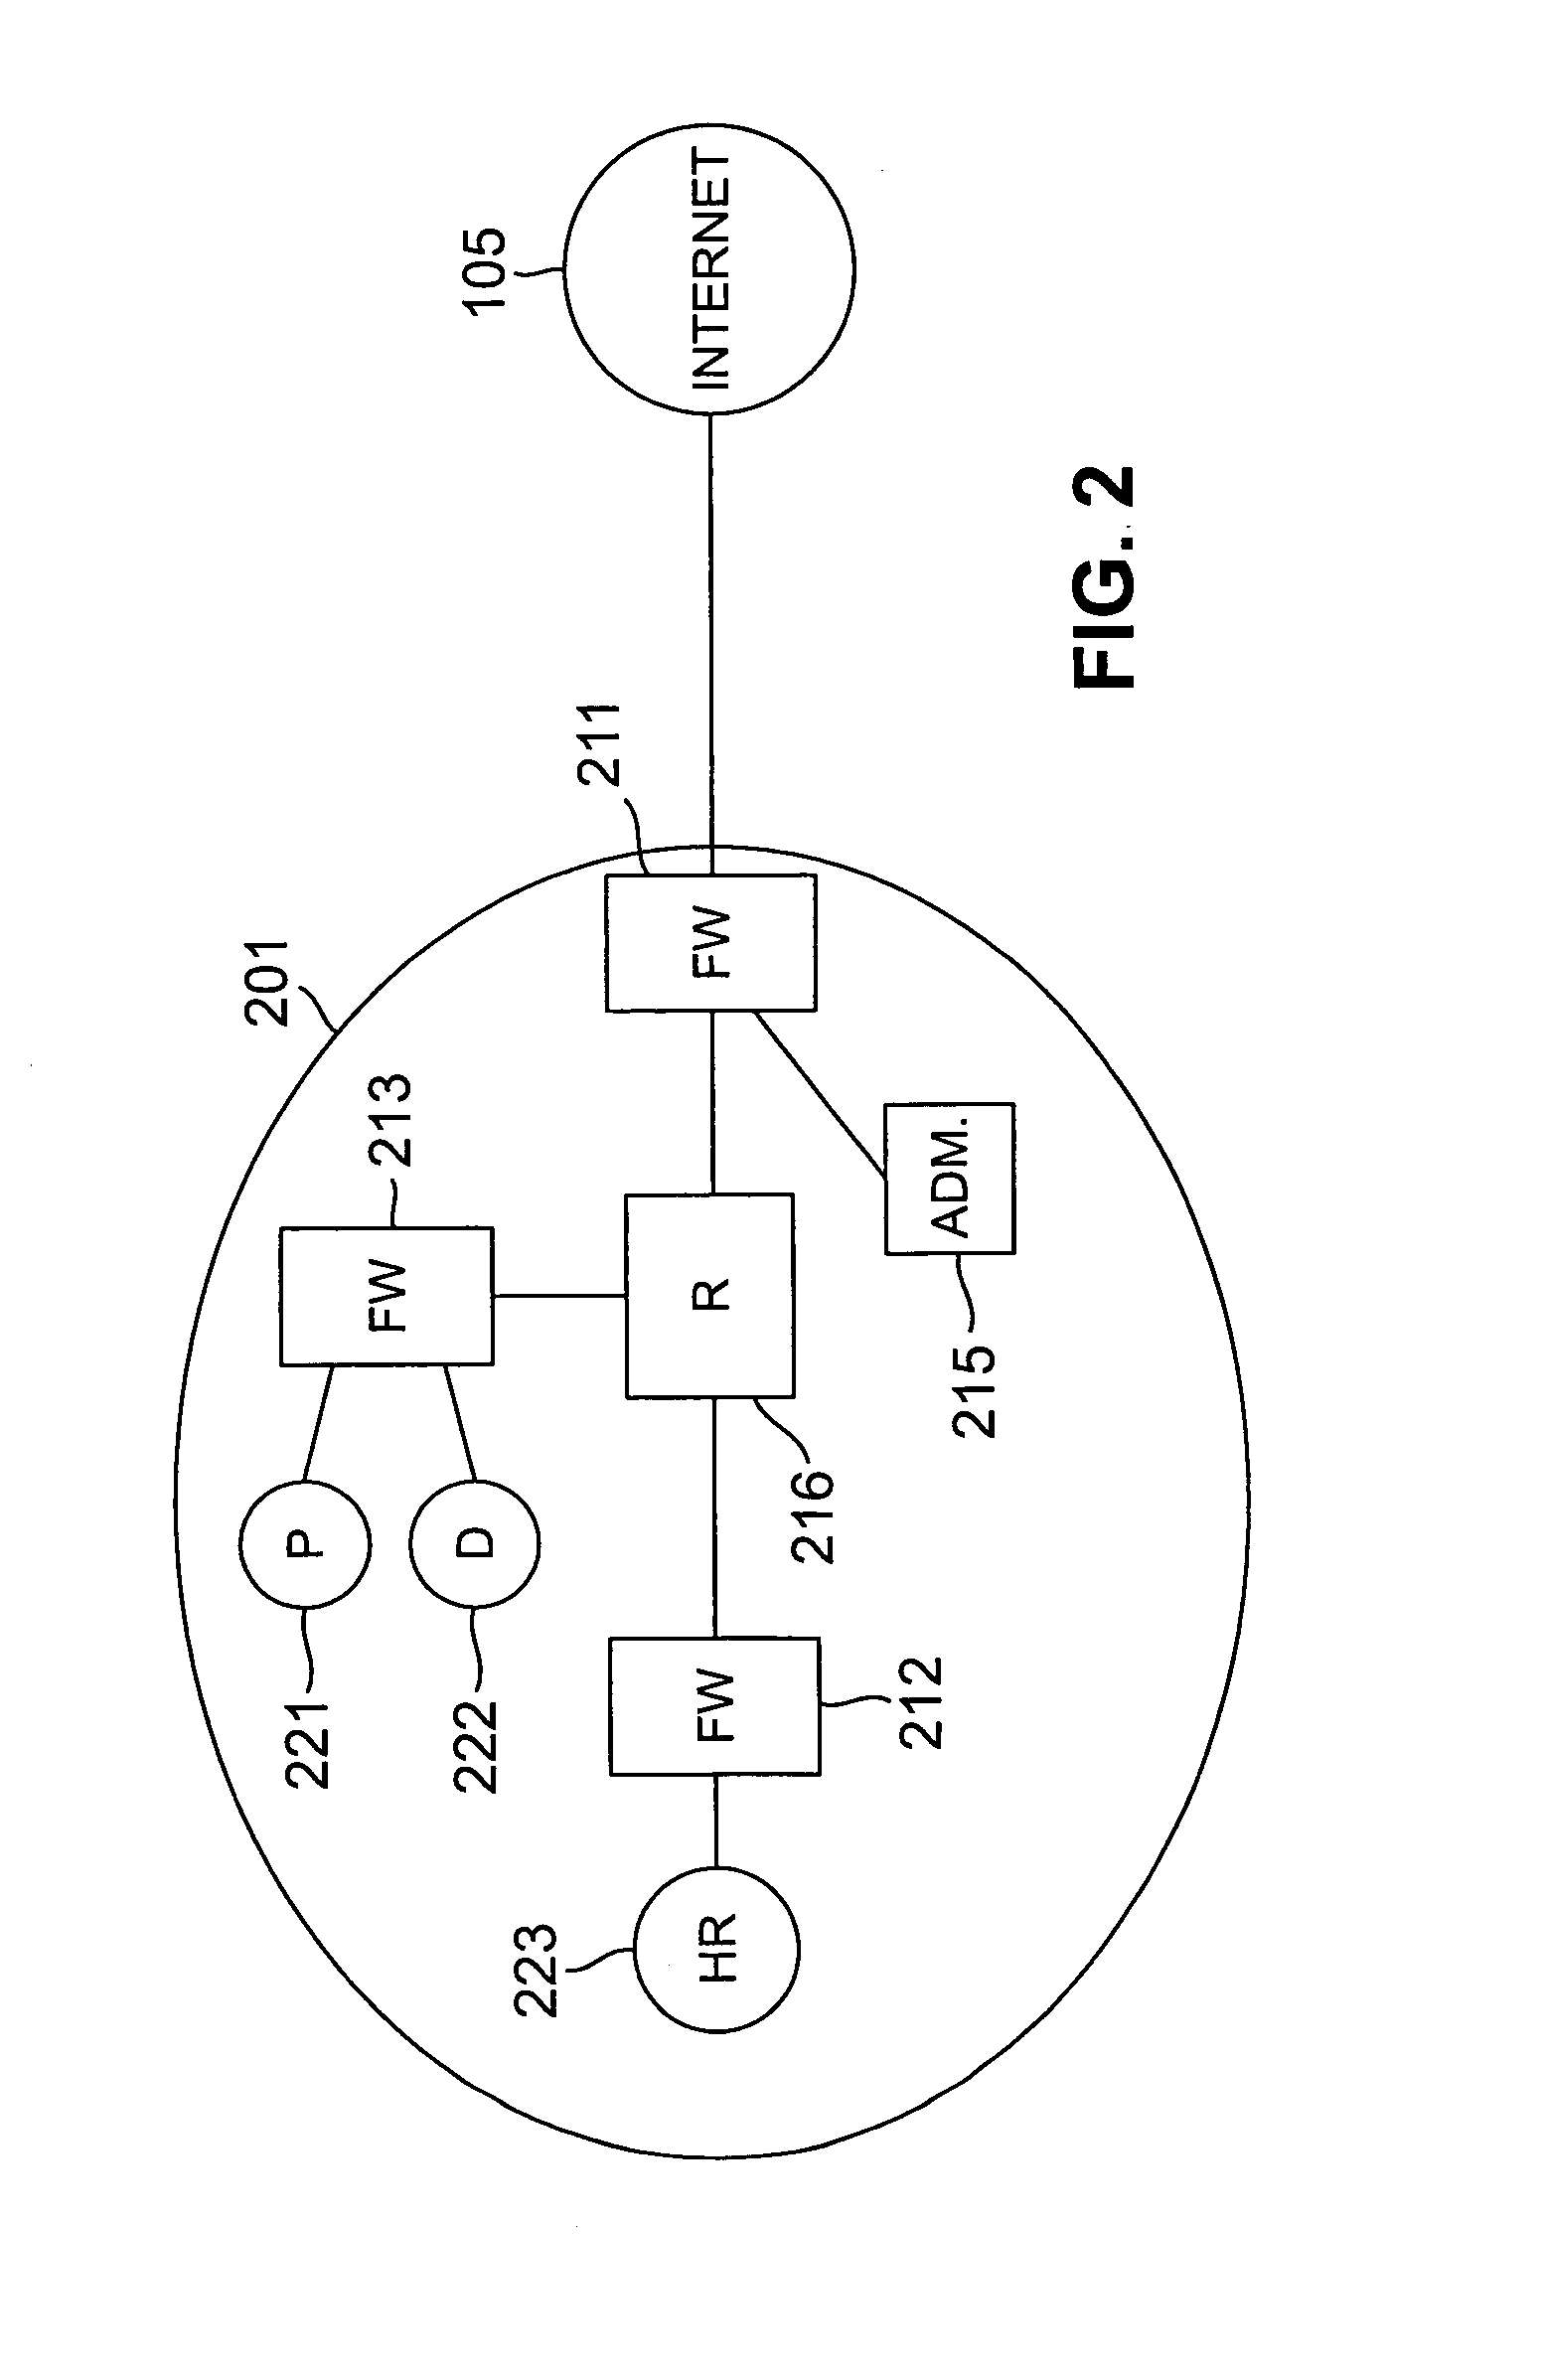 Methods and apparatus for a computer network firewall with multiple domain support